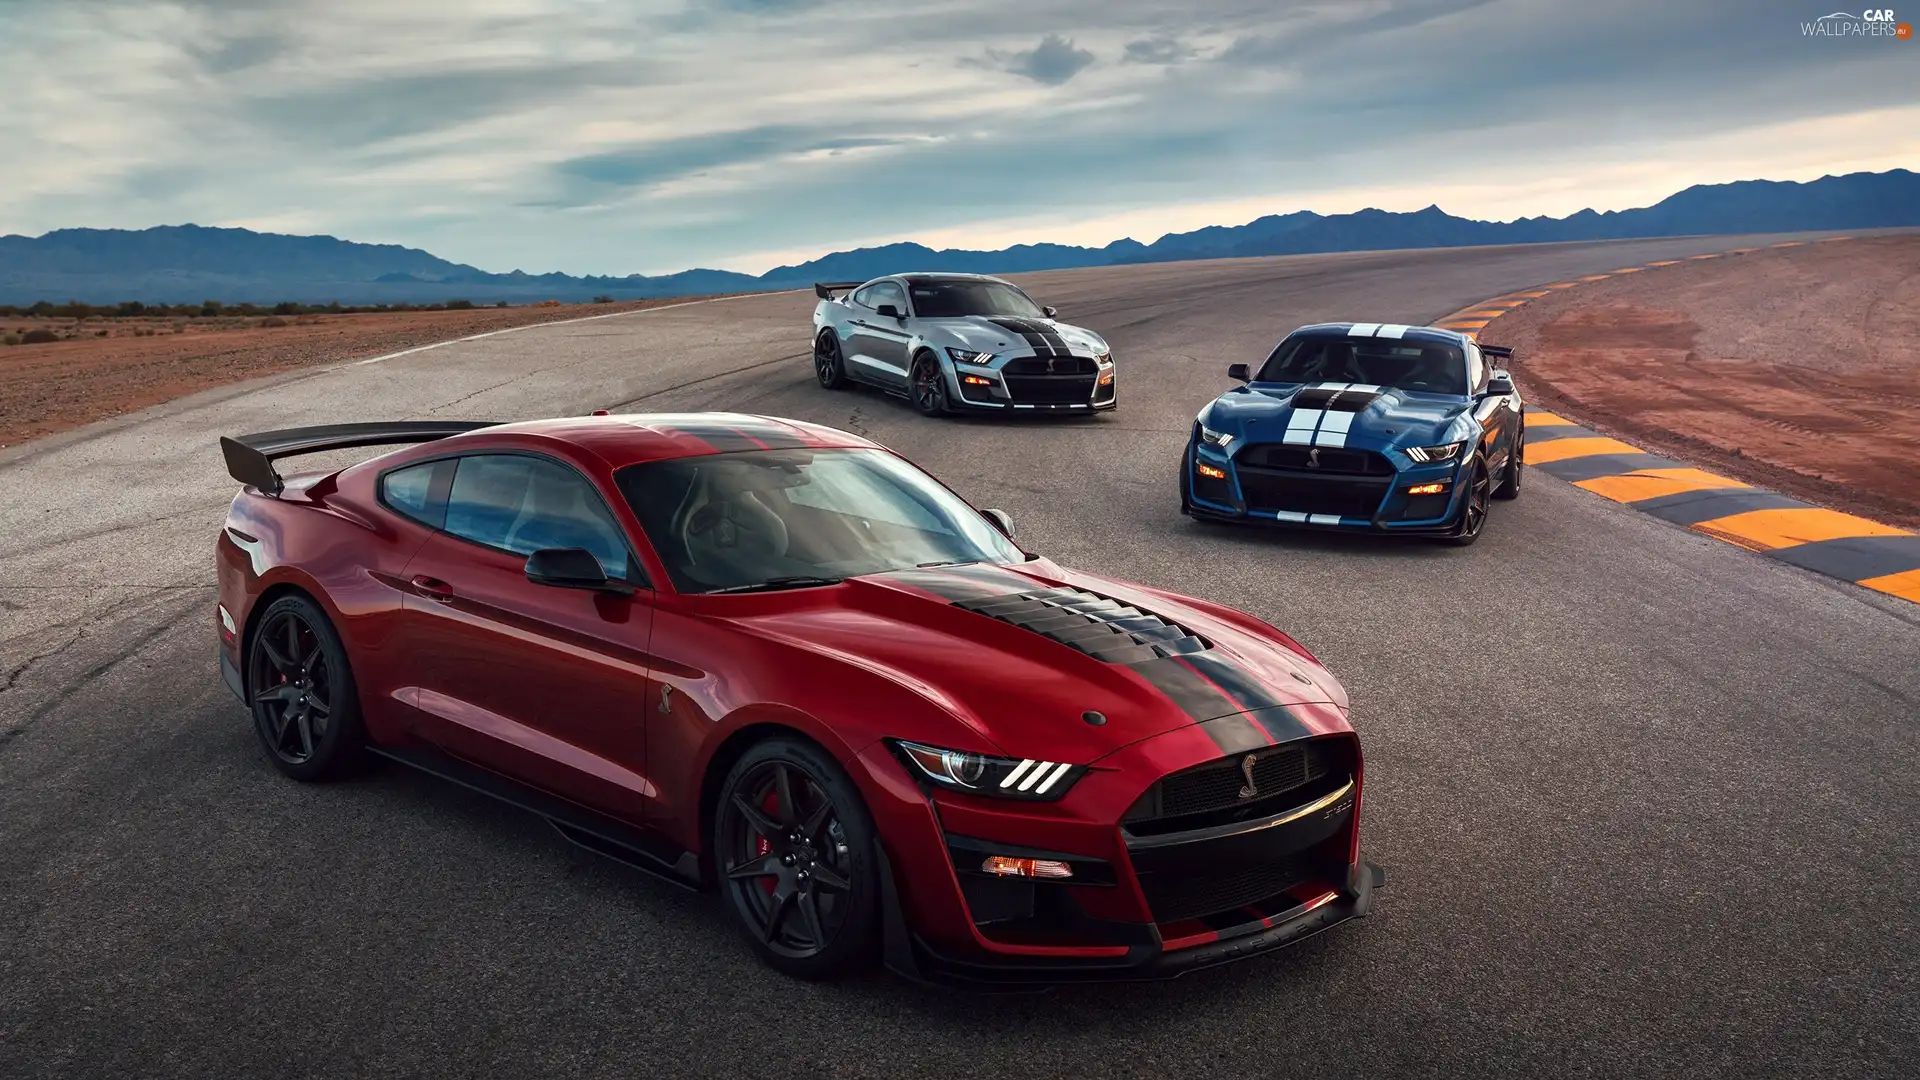 Ford Mustang Shelby GT500, Three, cars